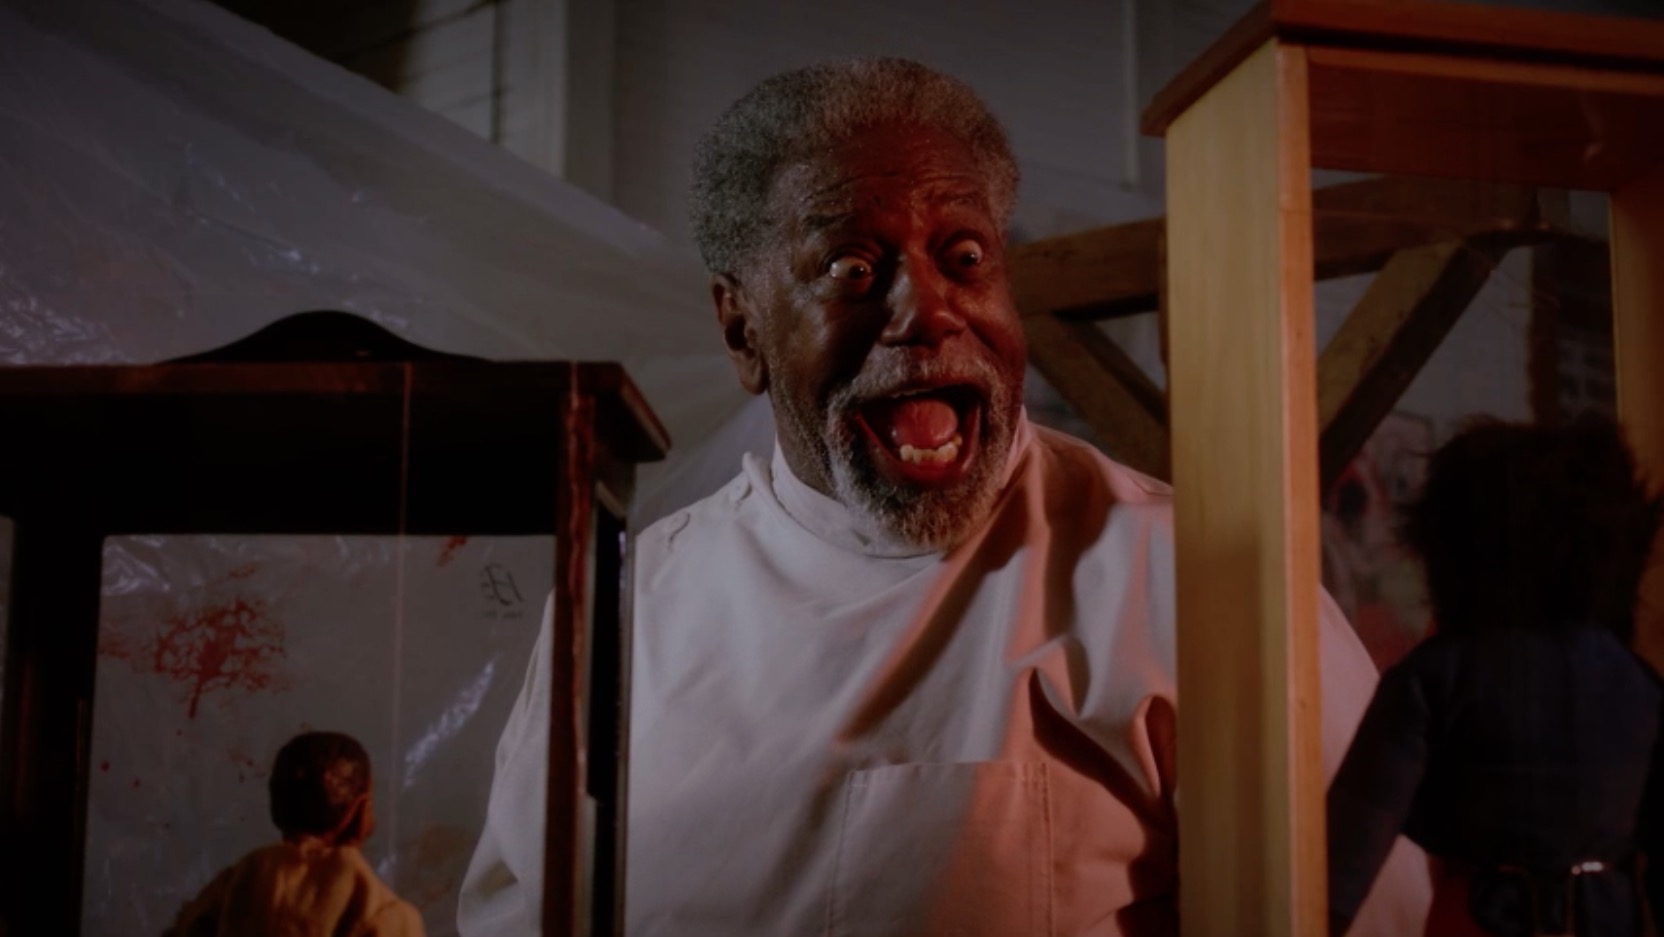 tales from the hood 2 31 days of horror